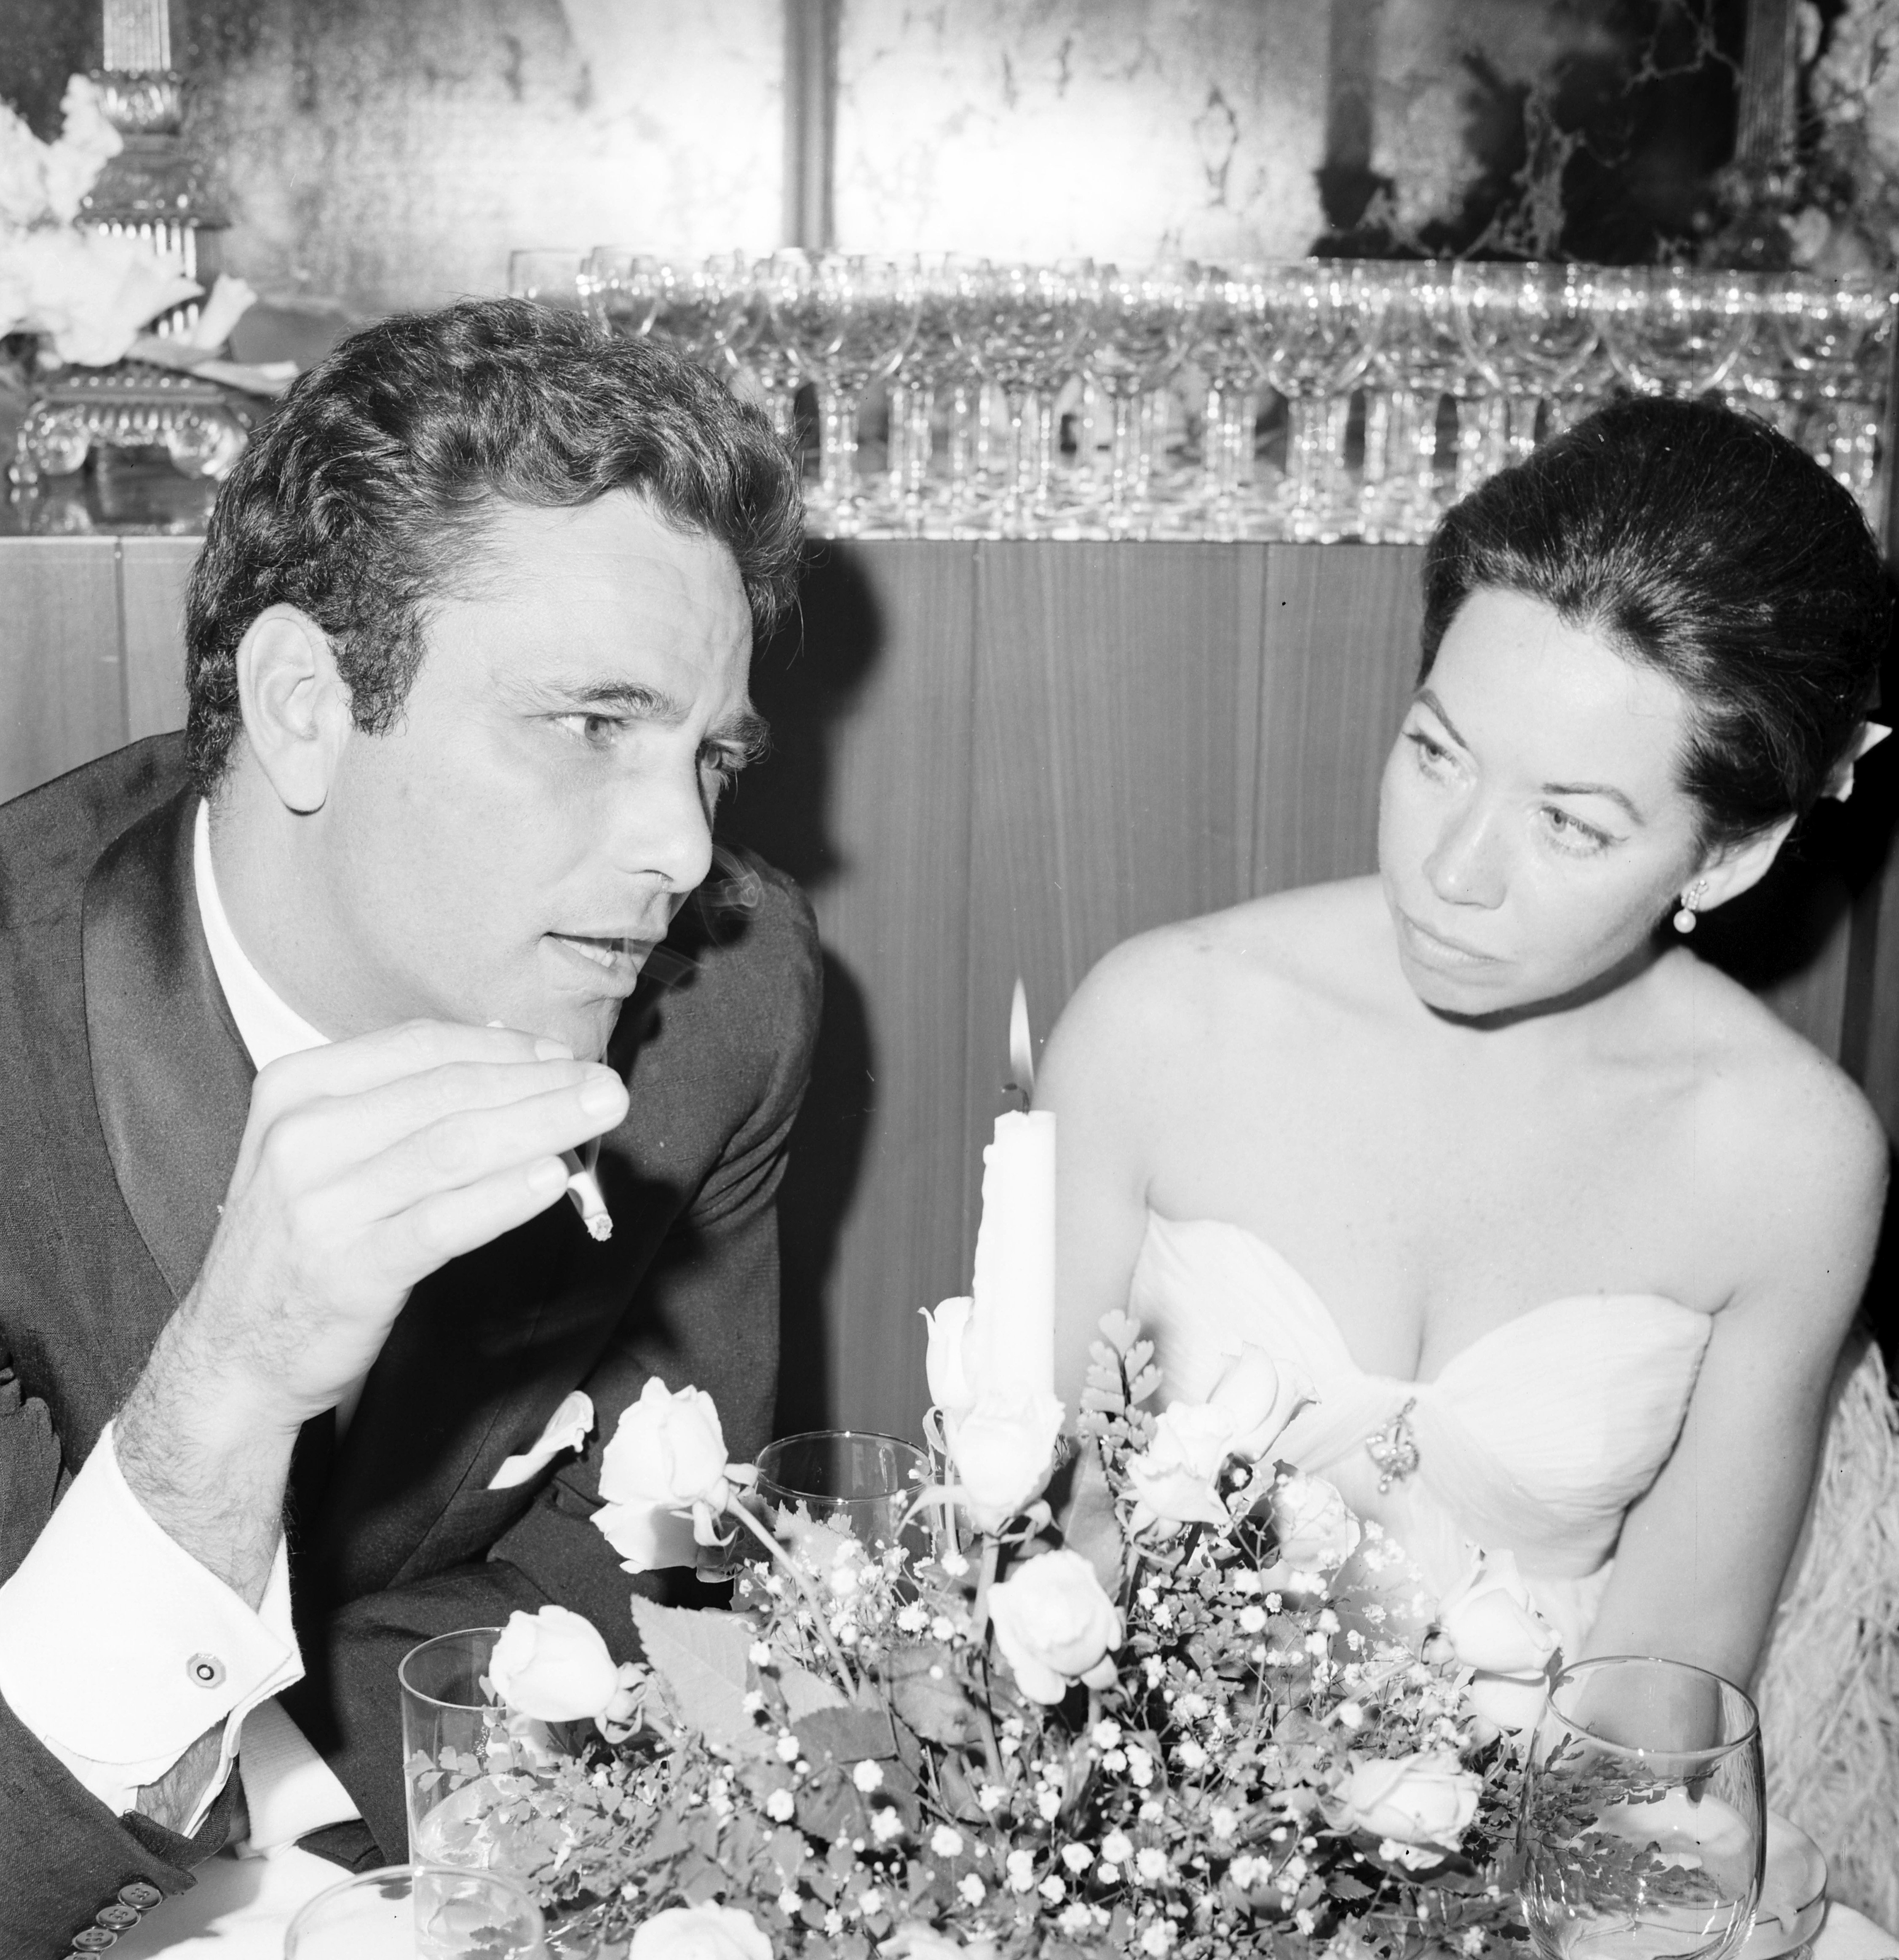 Actor Peter Falk and wife Alyce Mayo attend a party in Los Angeles, California in 1966 | Source: Getty Images